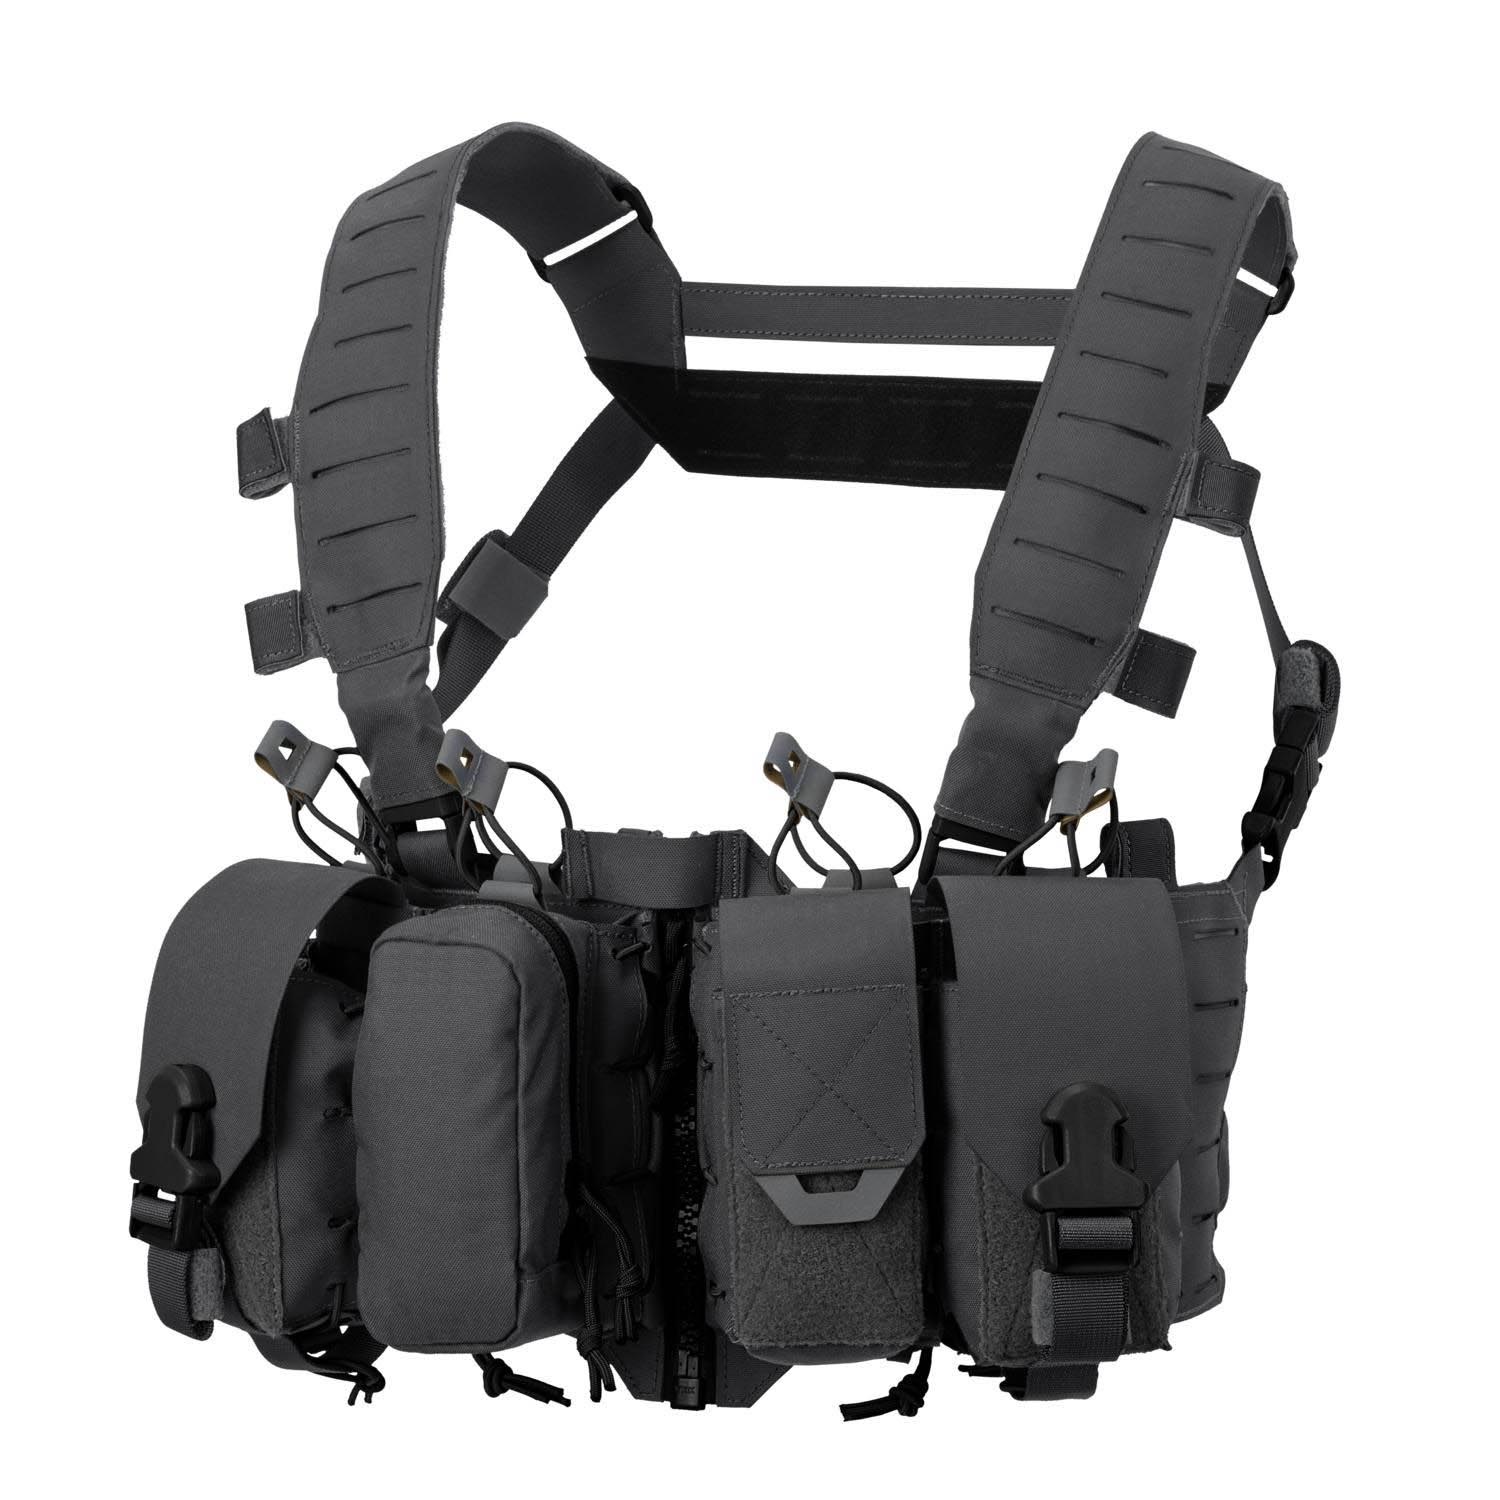 Direct Action Hurricane Hybrid Chest Rig shadow grey